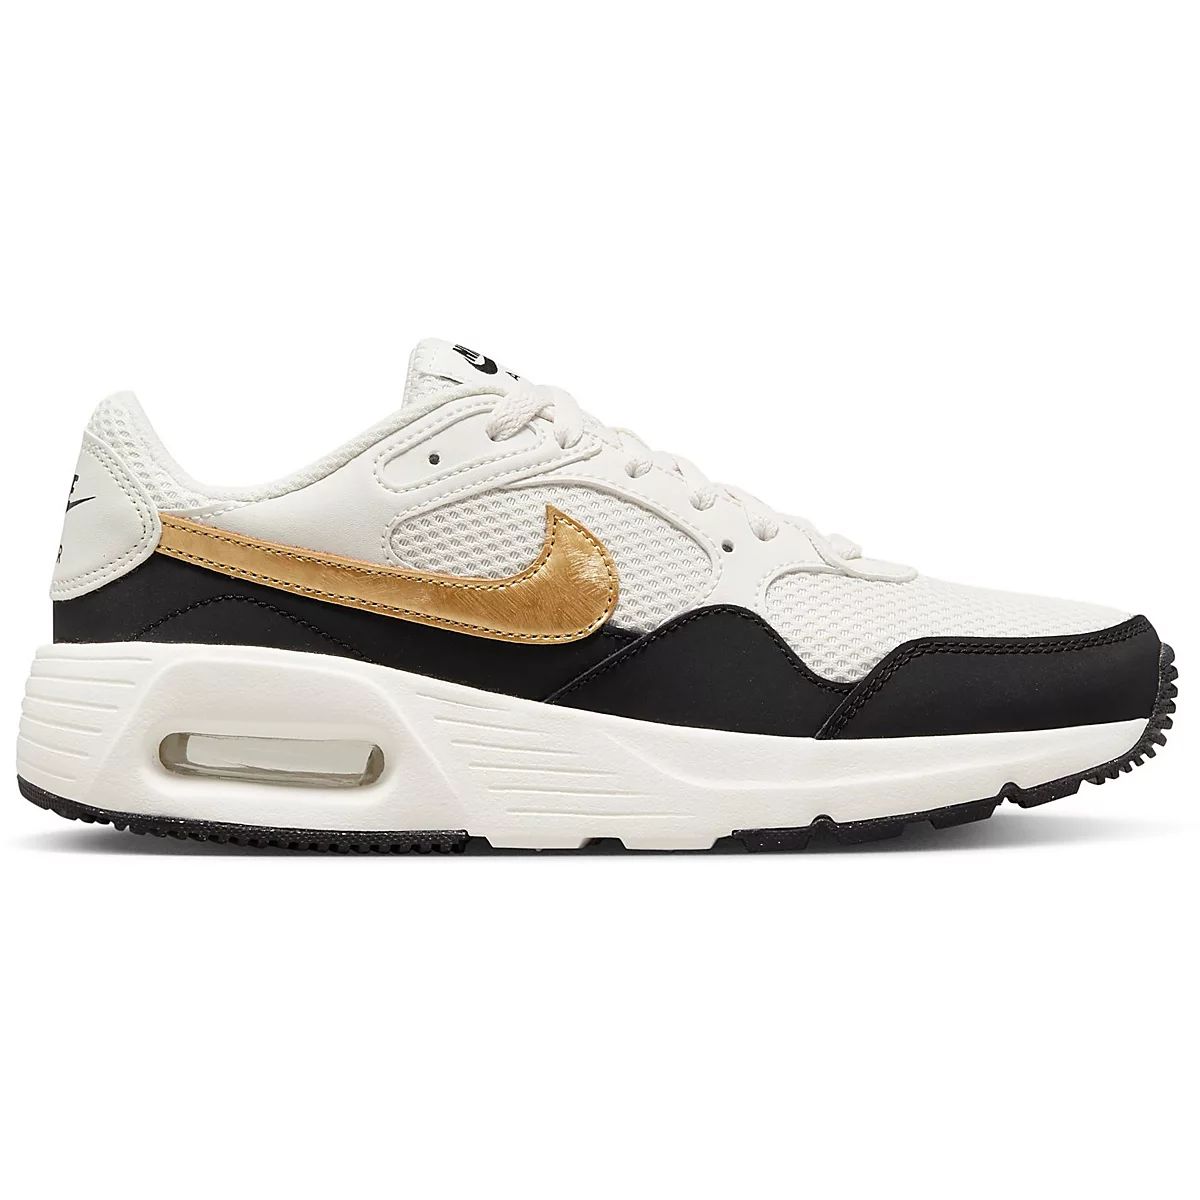 Nike Women’s Air Max SC | Academy | Academy Sports + Outdoors